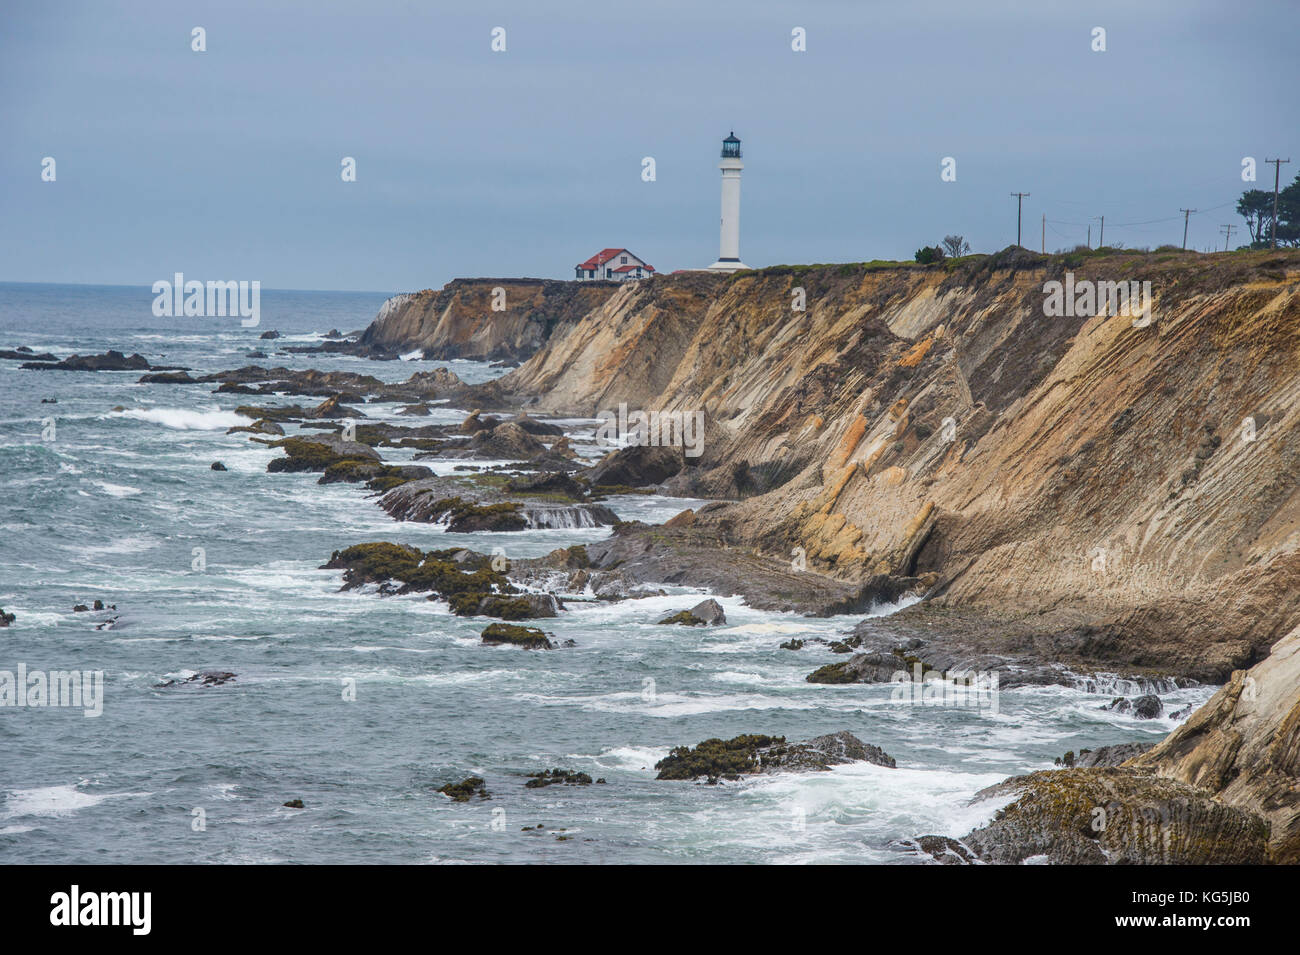 Point Arena Lighthouse and Museum, Nordkalifornien, USA Stockfoto